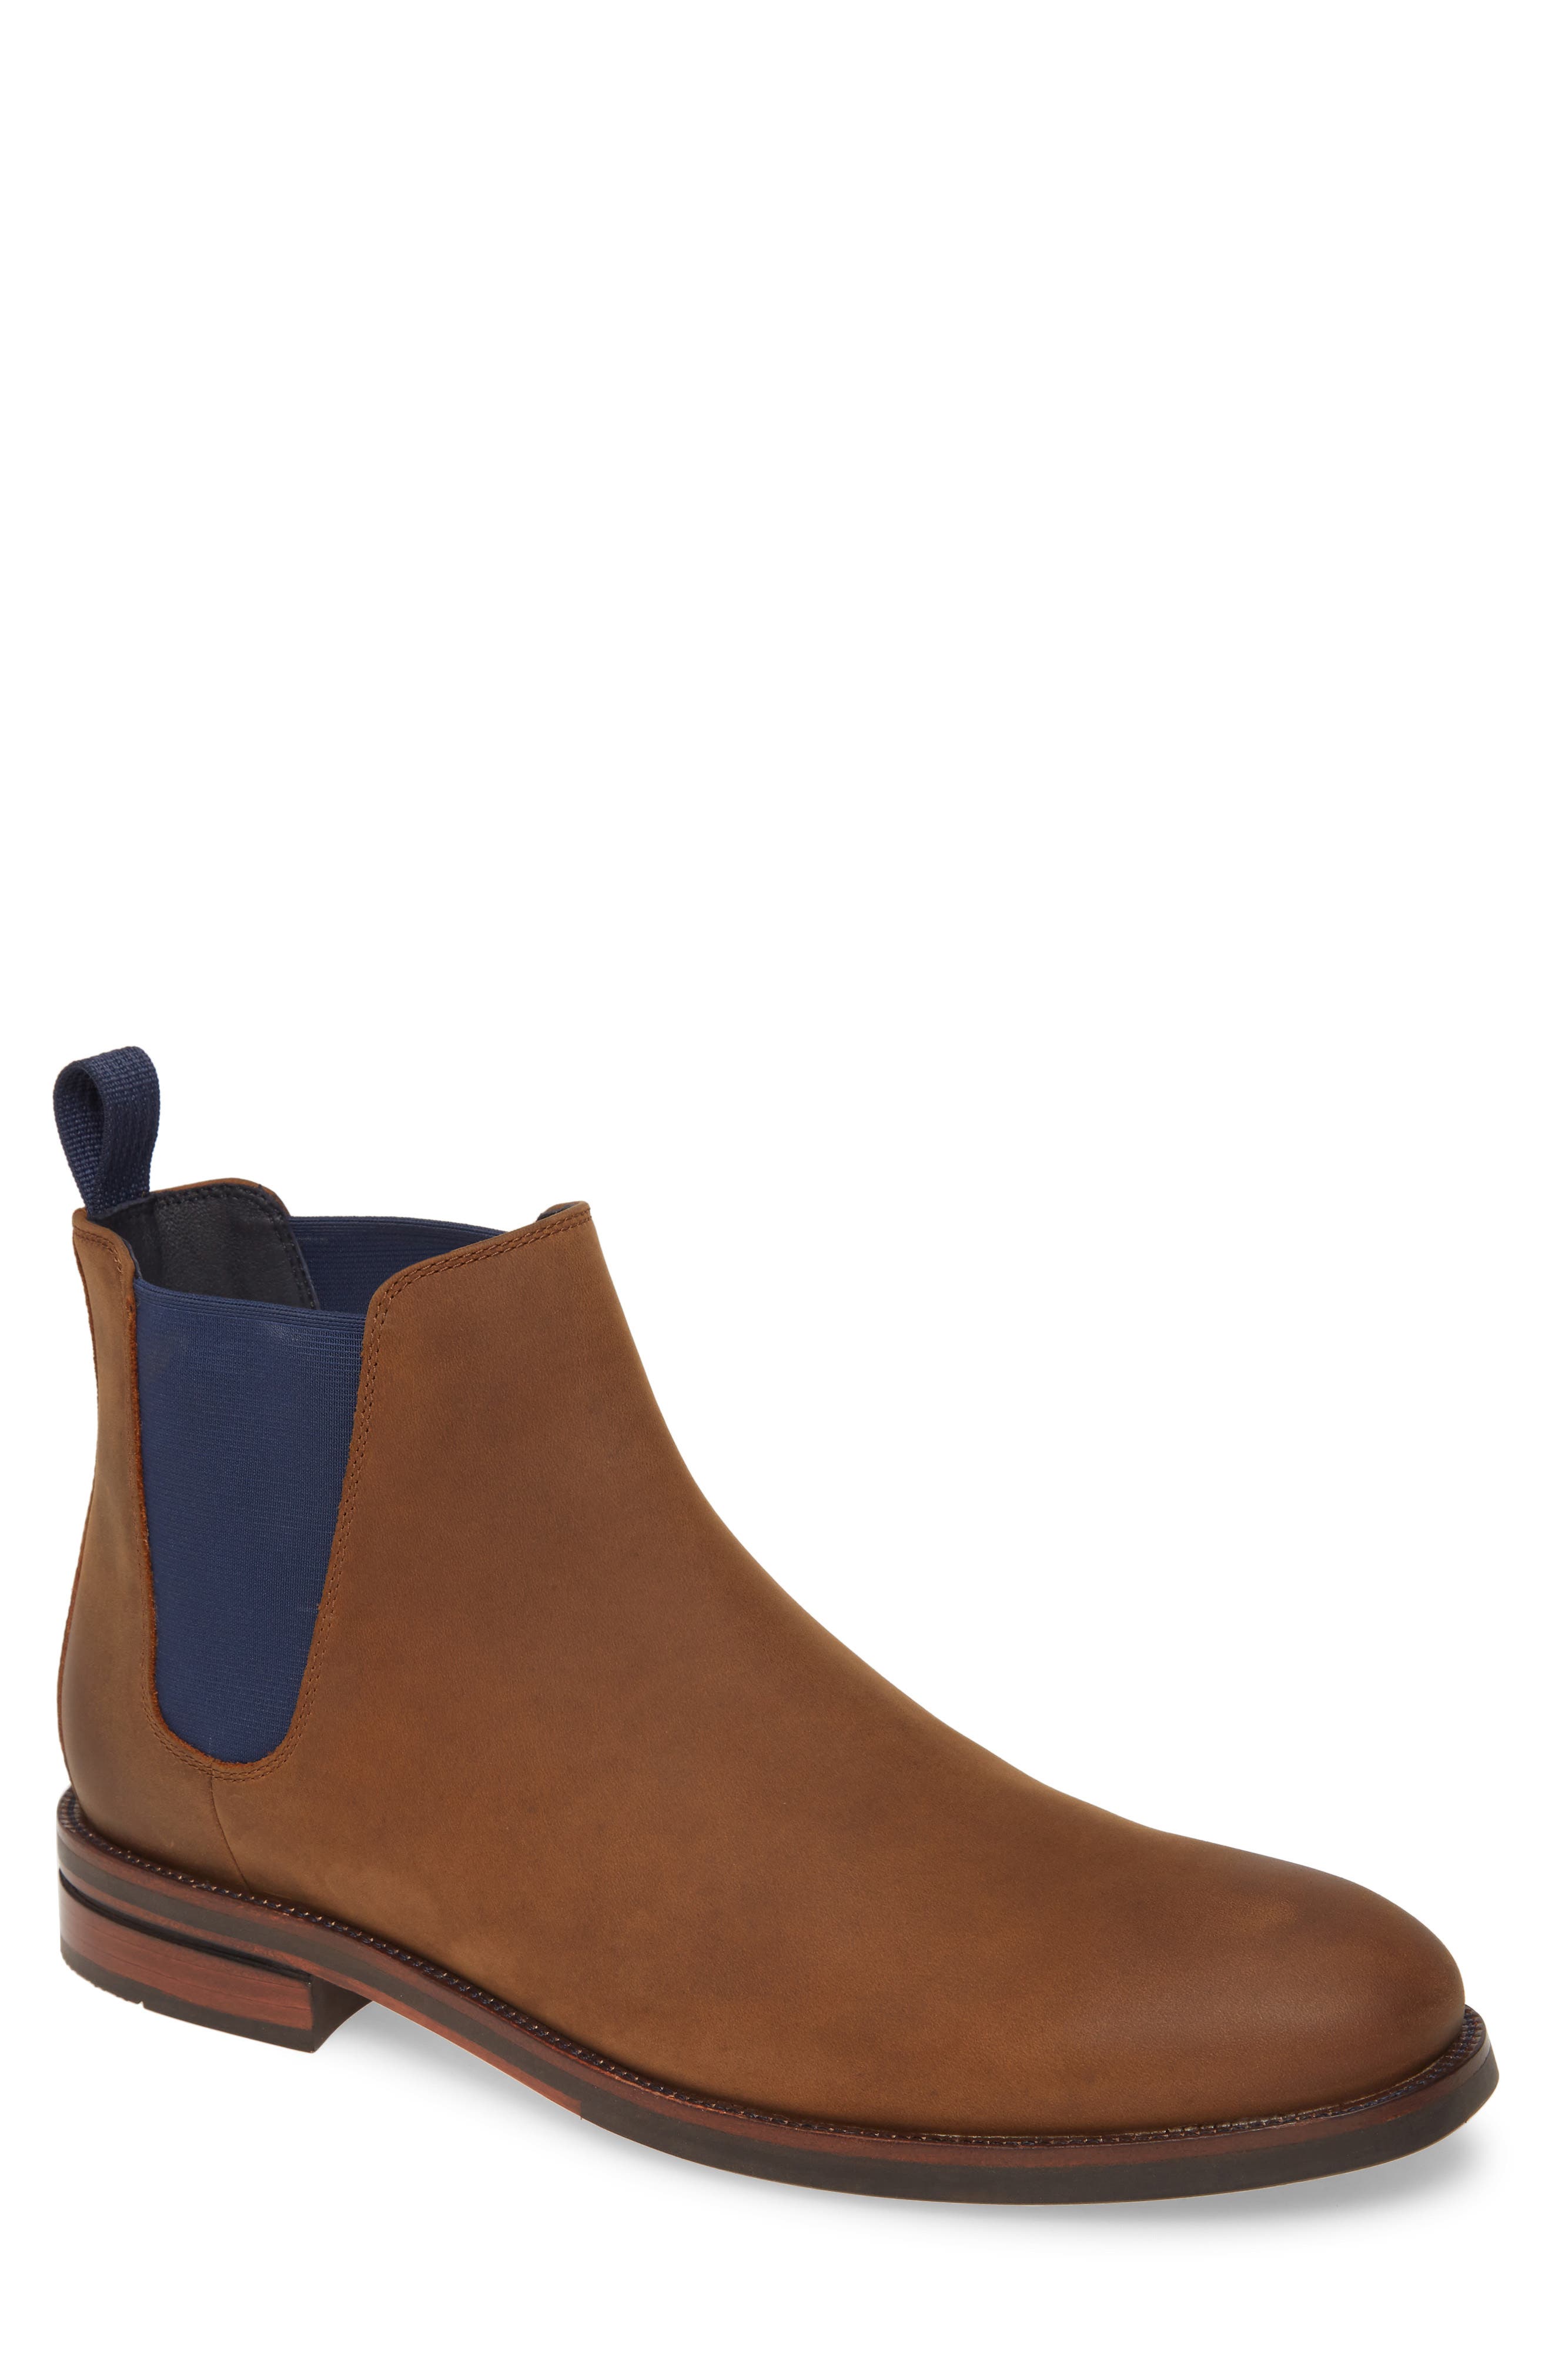 mens chelsea boots zappos